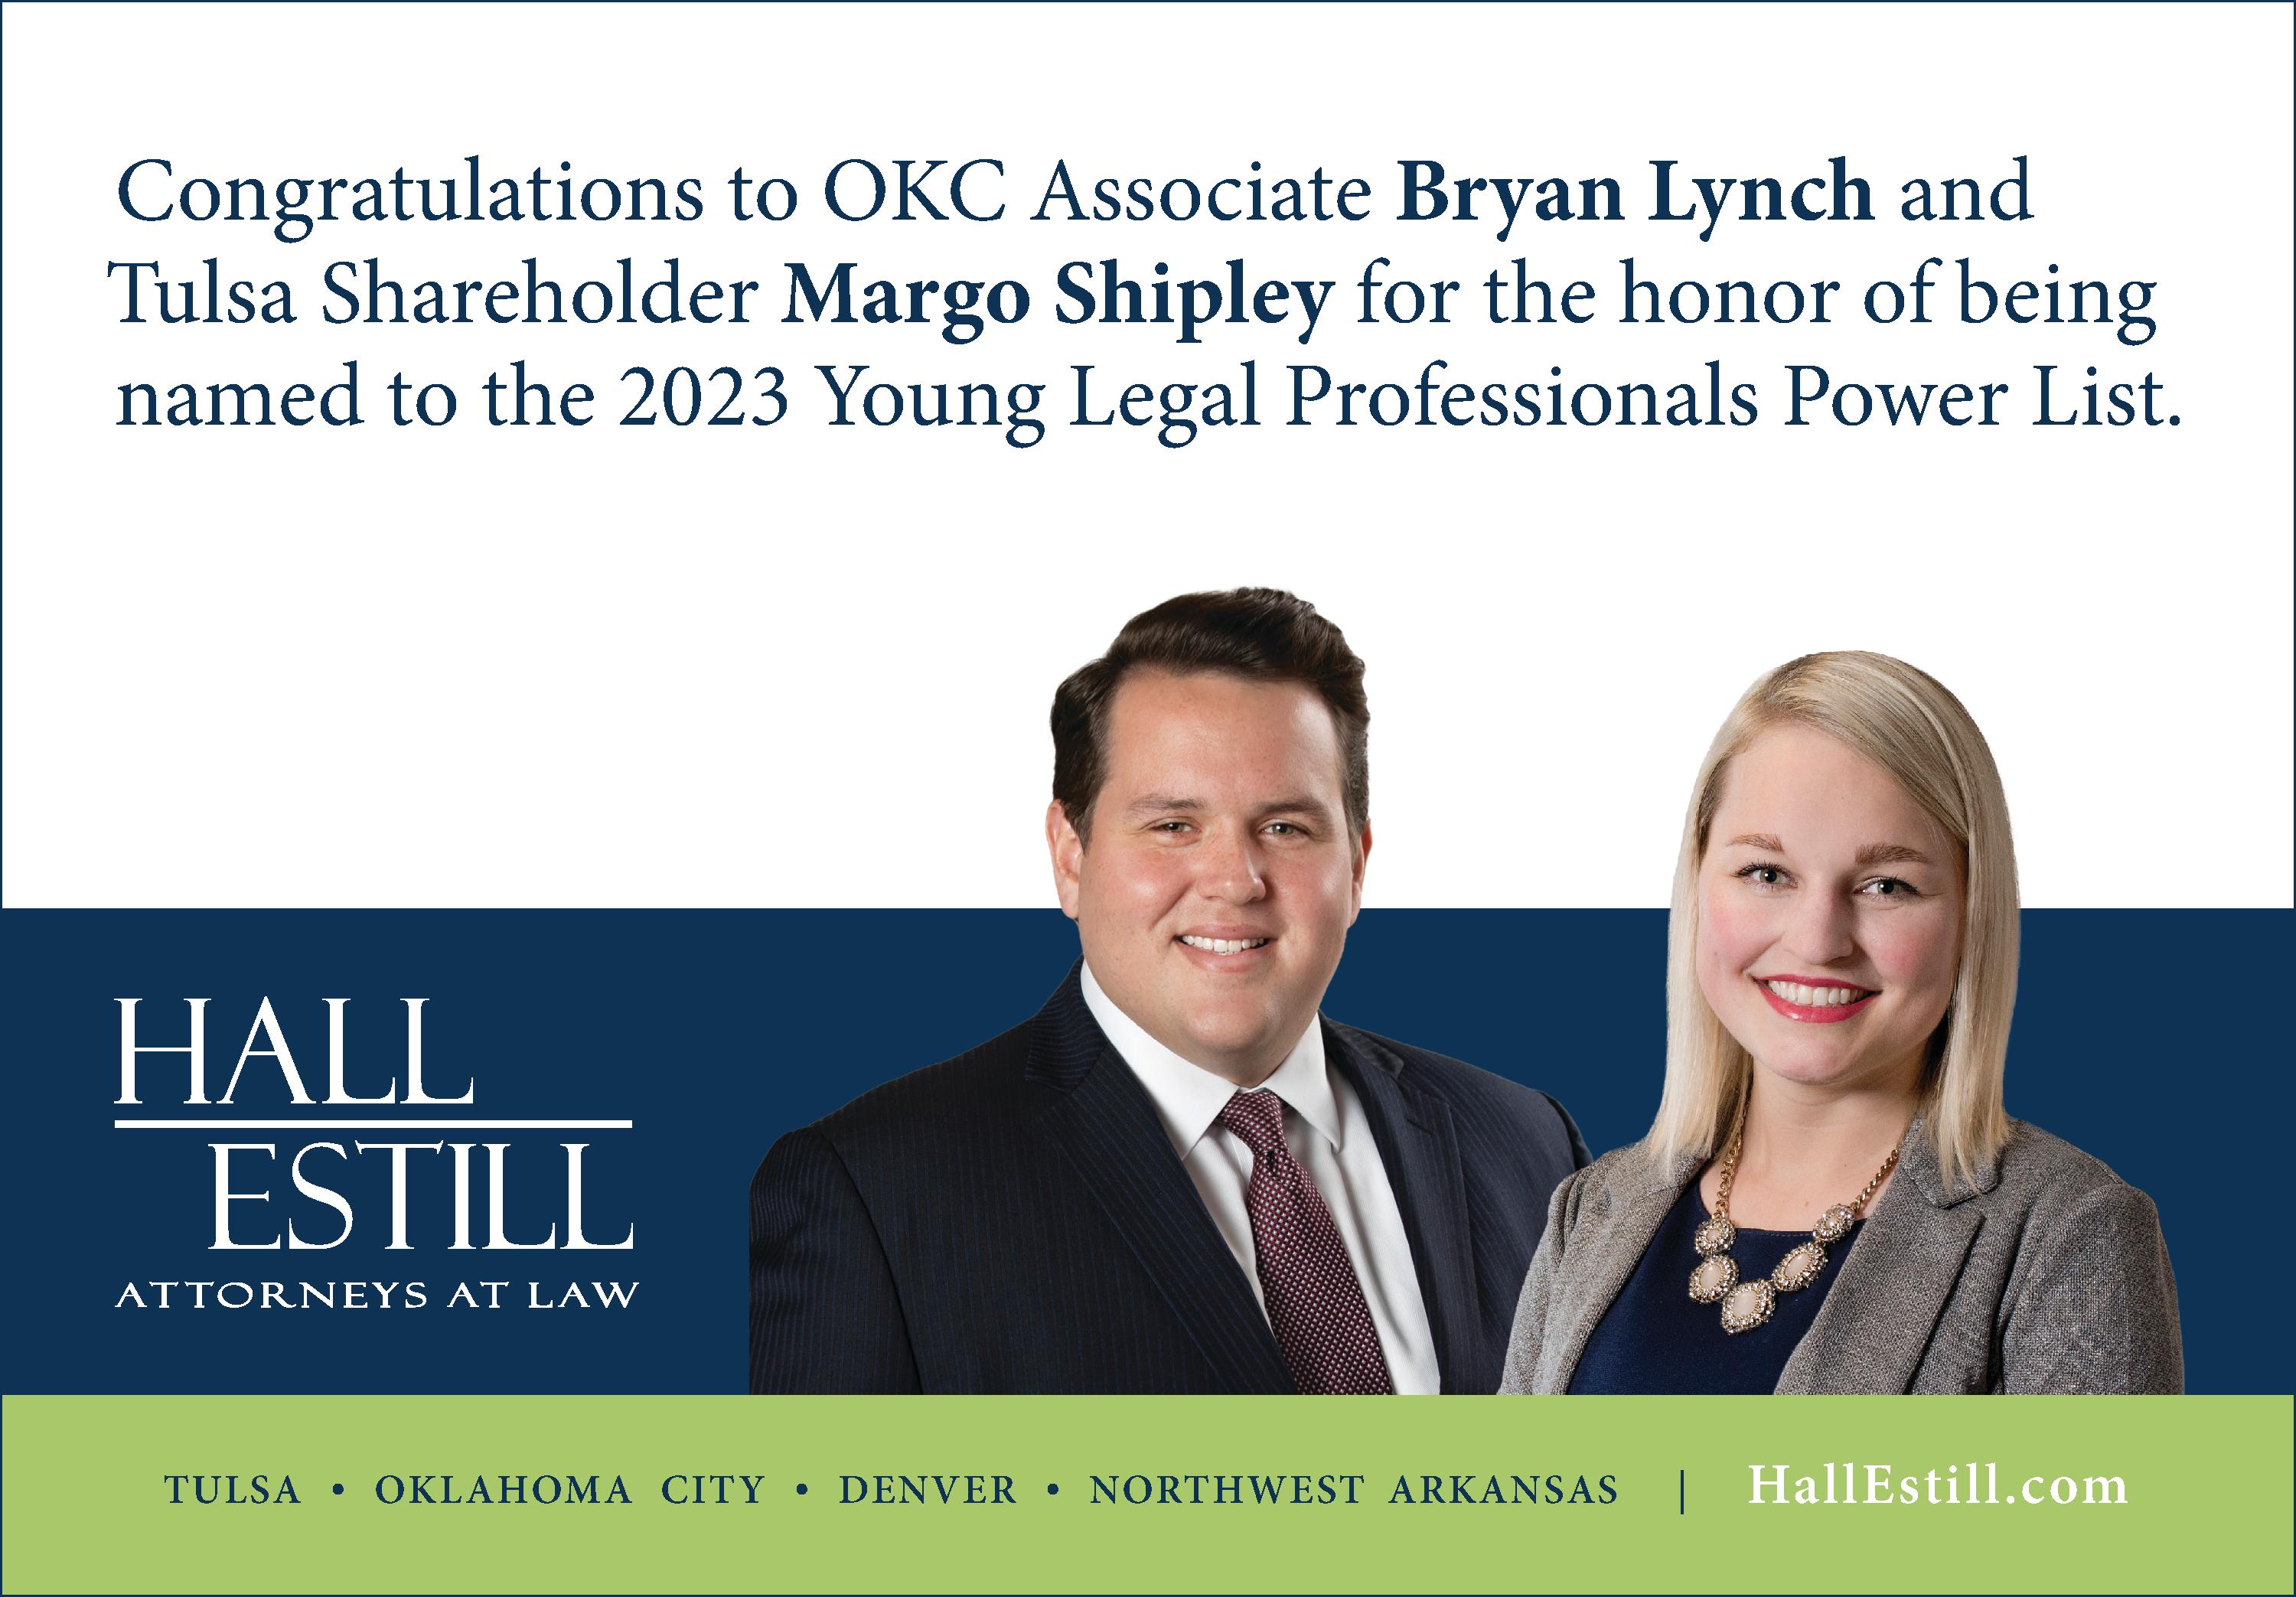 Congratulations to OKC Associate Bryan Lynch and shareholder Margo Shipley for the honor of being named to the 2023 Young Legal Professionals Power List.